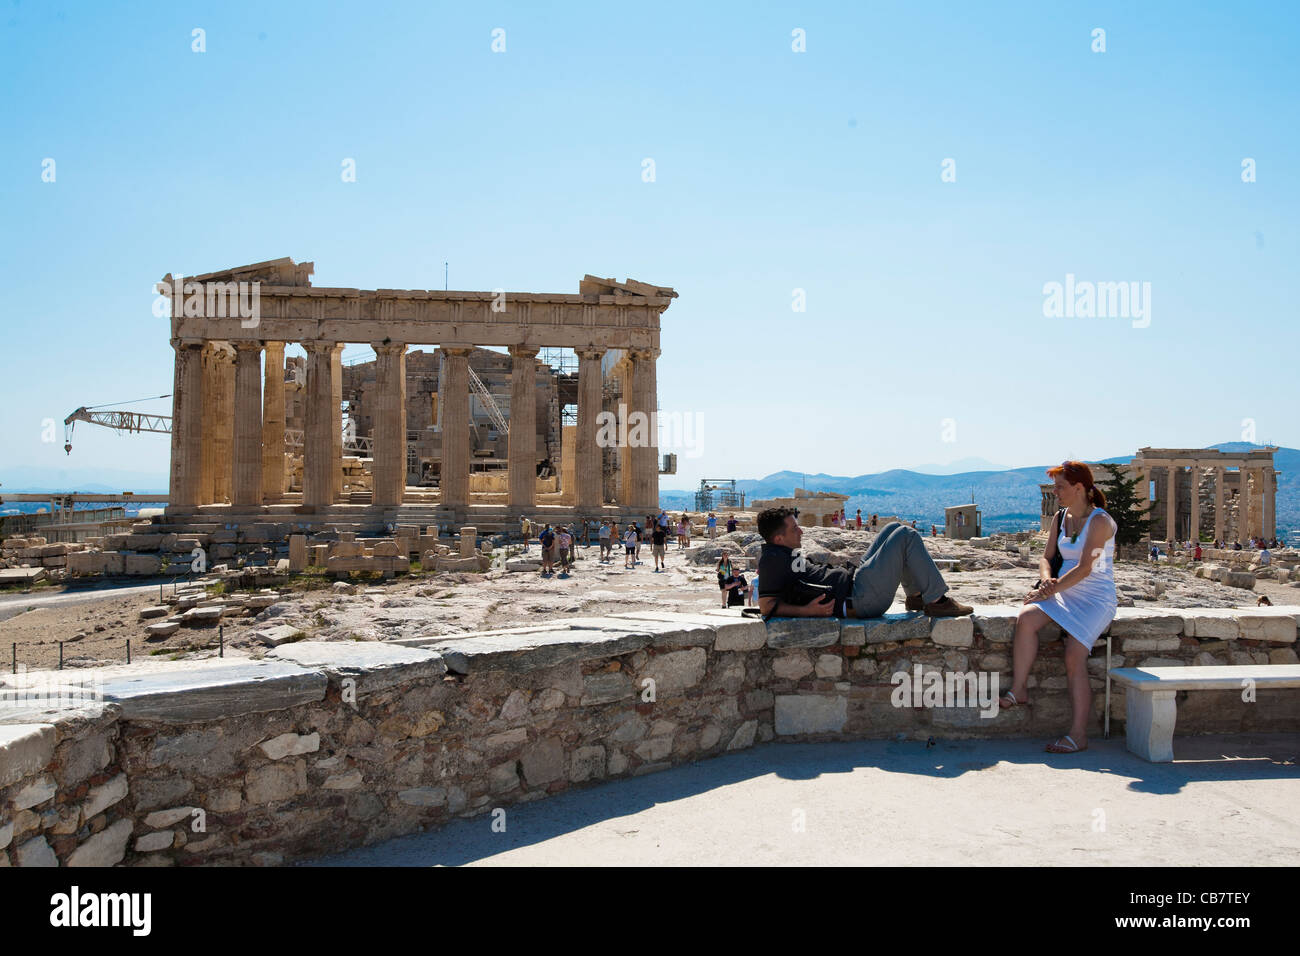 Travel and architecture shots from Greece - A tourist couple relax by the Parthenon in Athens Akropolis Stock Photo